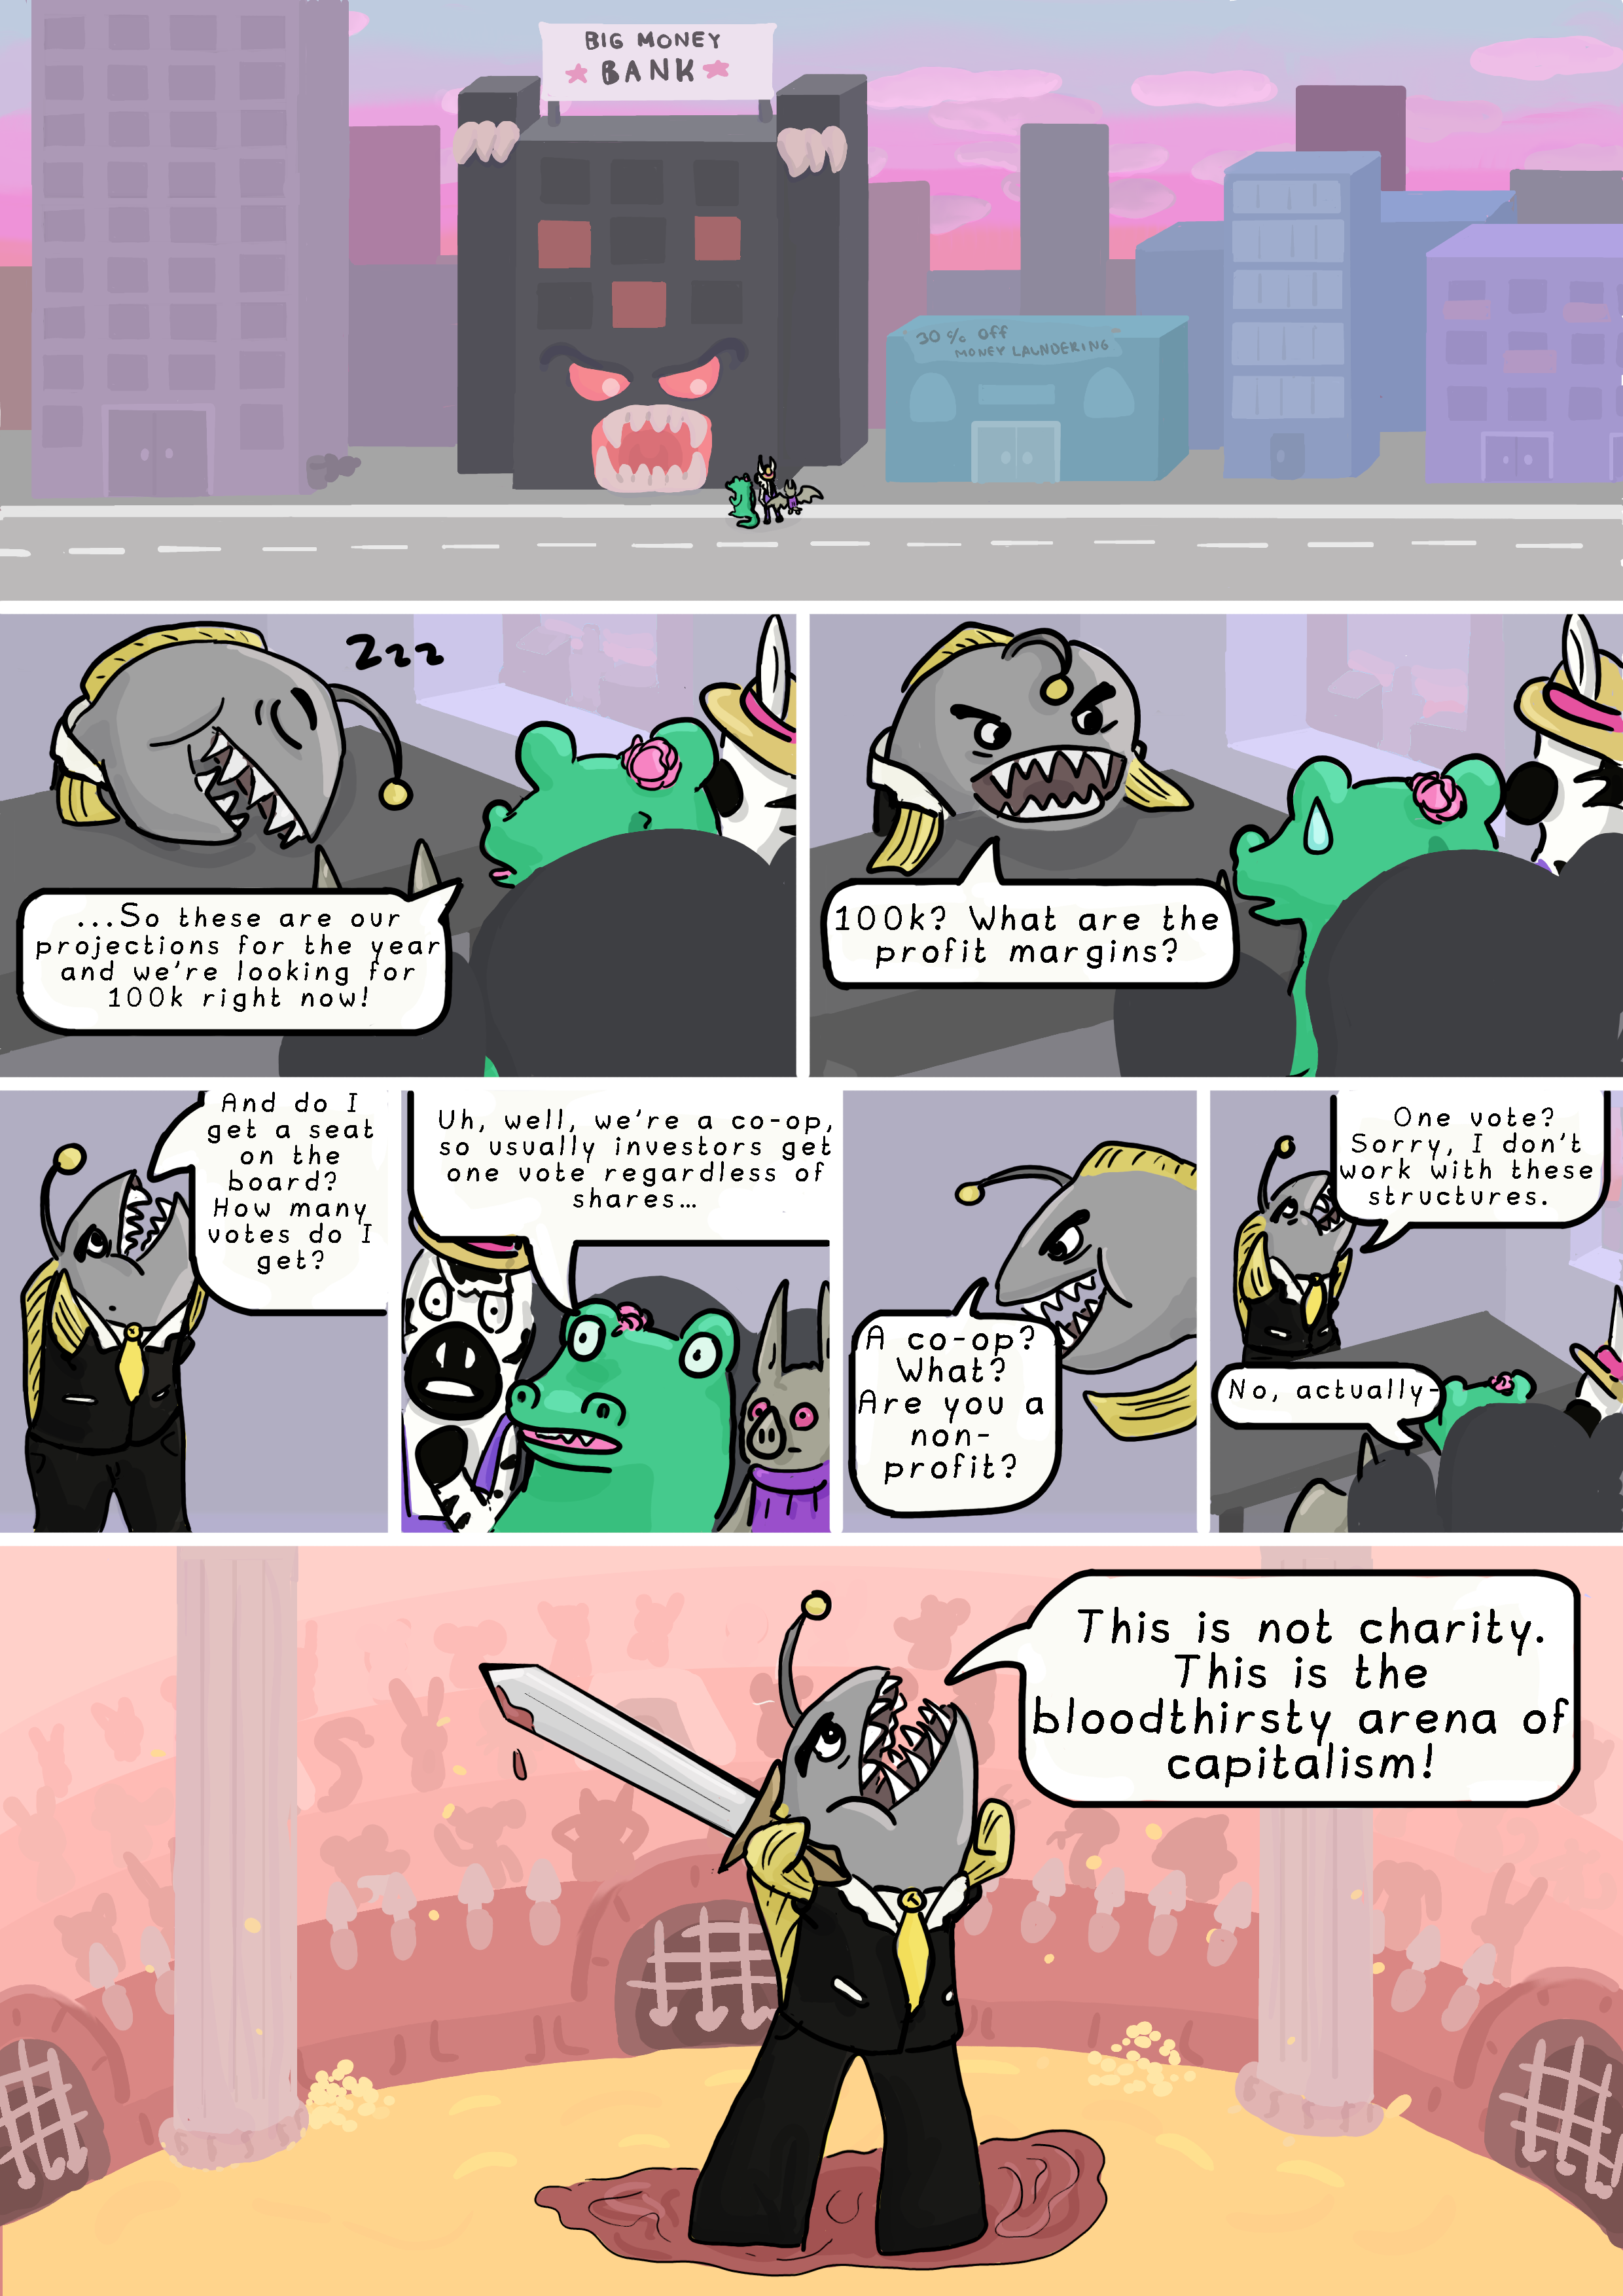 Page 5. Panel 1: The animals are in a city at sunset. They are standing in front of a black bank building that has a 'Big Money Bank' sign on top of it. The building has glowing, red eyes and teeth.

        Panel 2: At the investor's office. The office is grey and barren. The investor is an Anglerfish wearing a suit and tie, and he is asleep at his desk. Alligator says: '...So these are our projections for the year and we’re looking for 100k right now!'

        Panel 3: The investor wakes up. He says: '100k? What are the profit margins?'

        Panel 4: The investor stands up. He says: 'And do I get a seat on the board? How many votes do I get?'

        Panel 5: The animals look stunned. Alligator says: 'Uh, well, we’re a co-op, so usually investors get one vote regardless of shares….'

        Panel 6: The investor asks: 'A co-op? What? Are you a non-profit?'

        Panel 7: Alligator stars saying 'Uh, actually...' but the investor interrupts her, saying 'One vote? Sorry, I don’t work with these structures'

        Panel 8: The investor is standing at an arena and holding a bloodied sword. He says: 'This is not charity. This is the bloodthirsty arena of capitalism!'